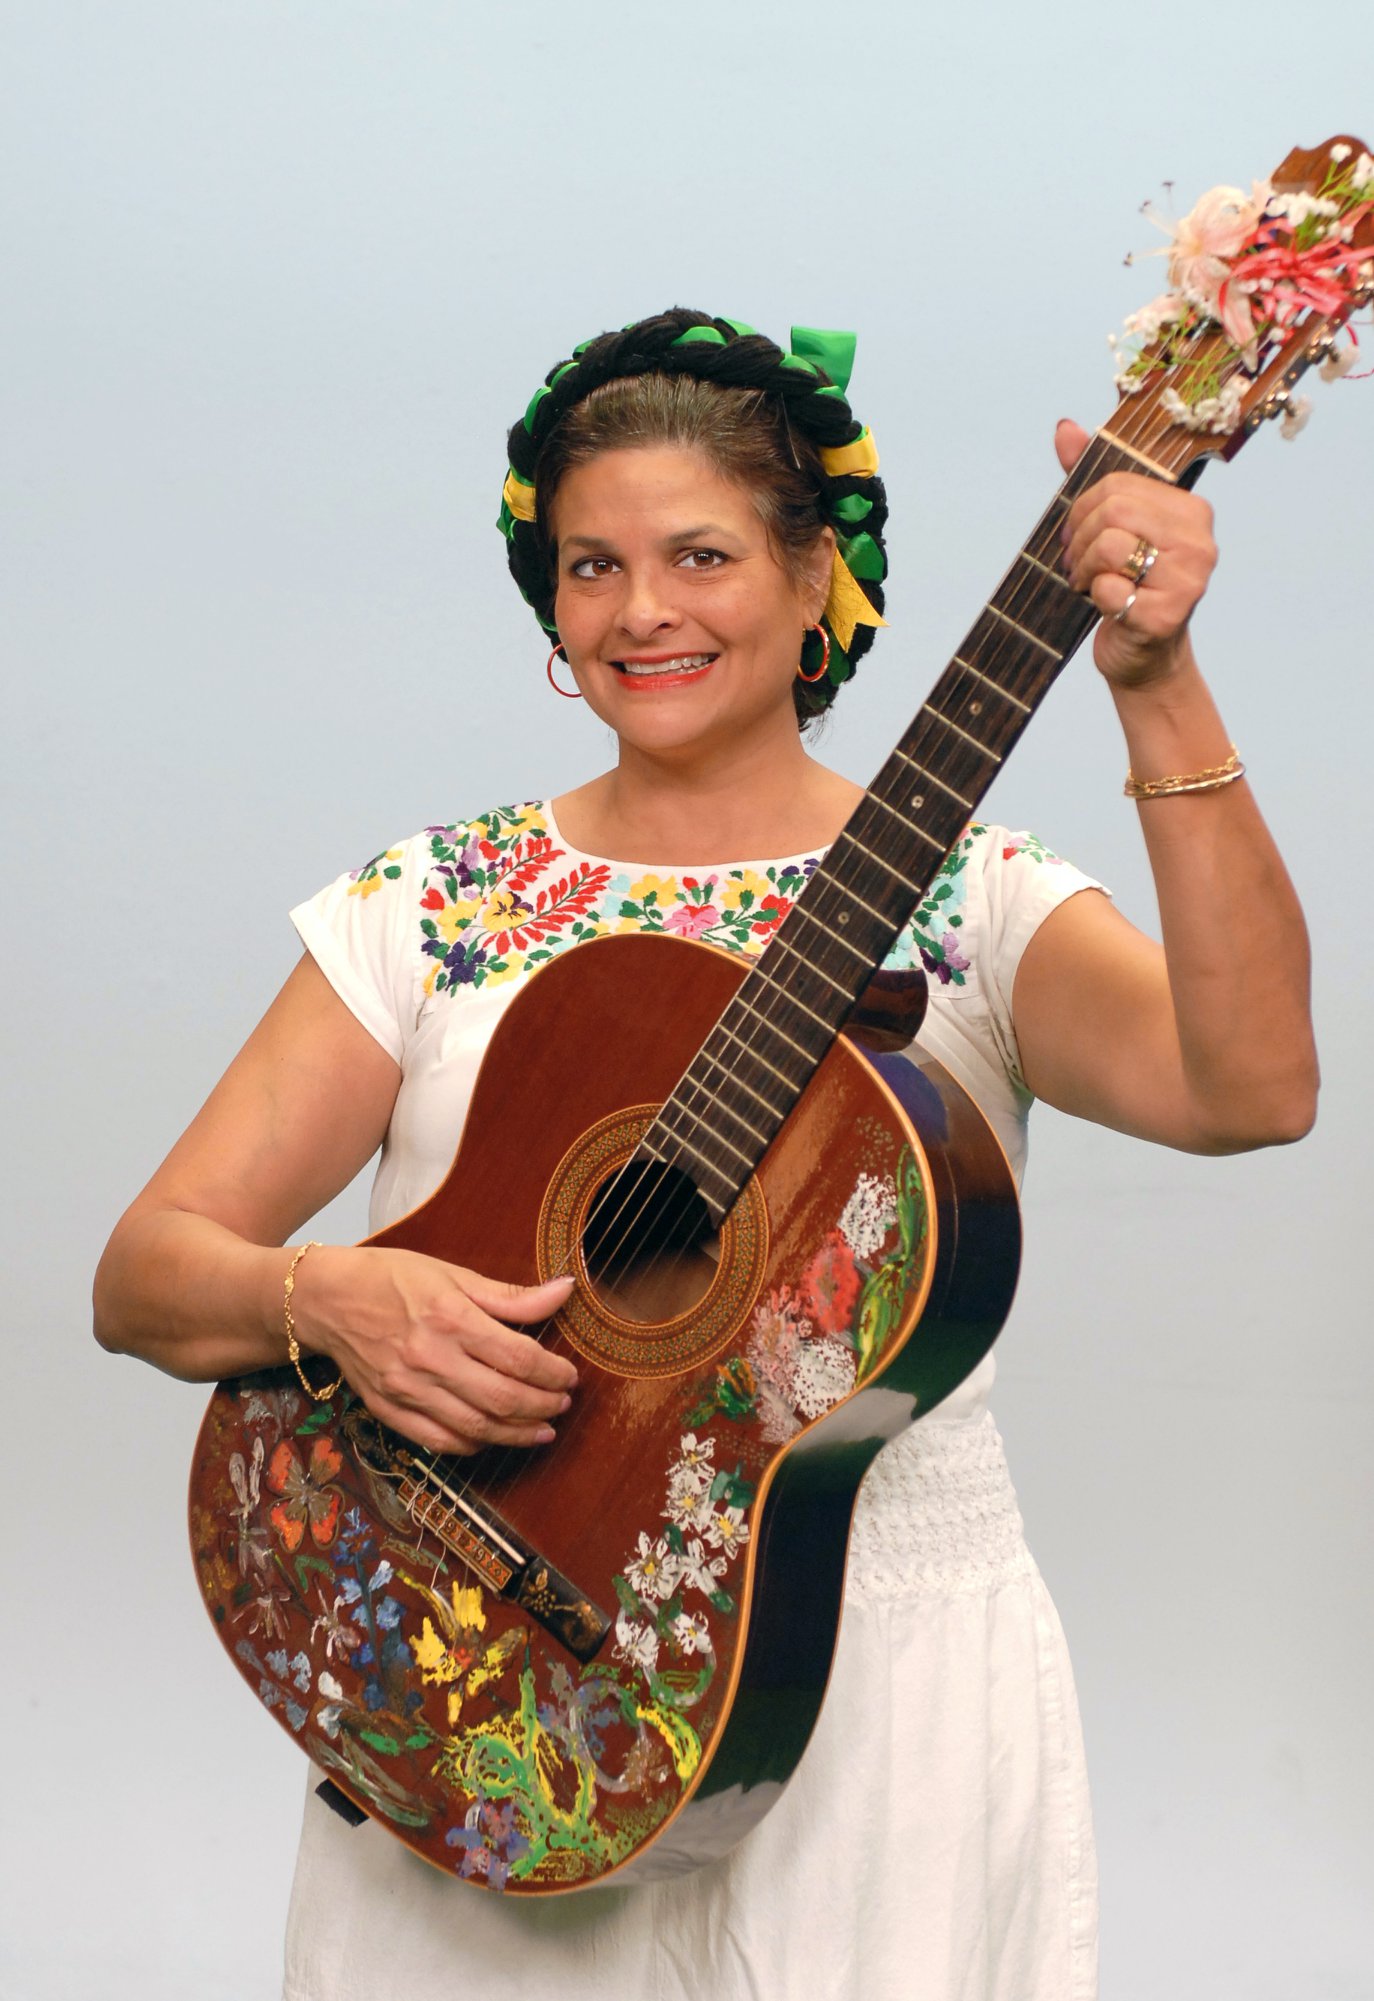 Georgette Baker holds a guitar and smiles.